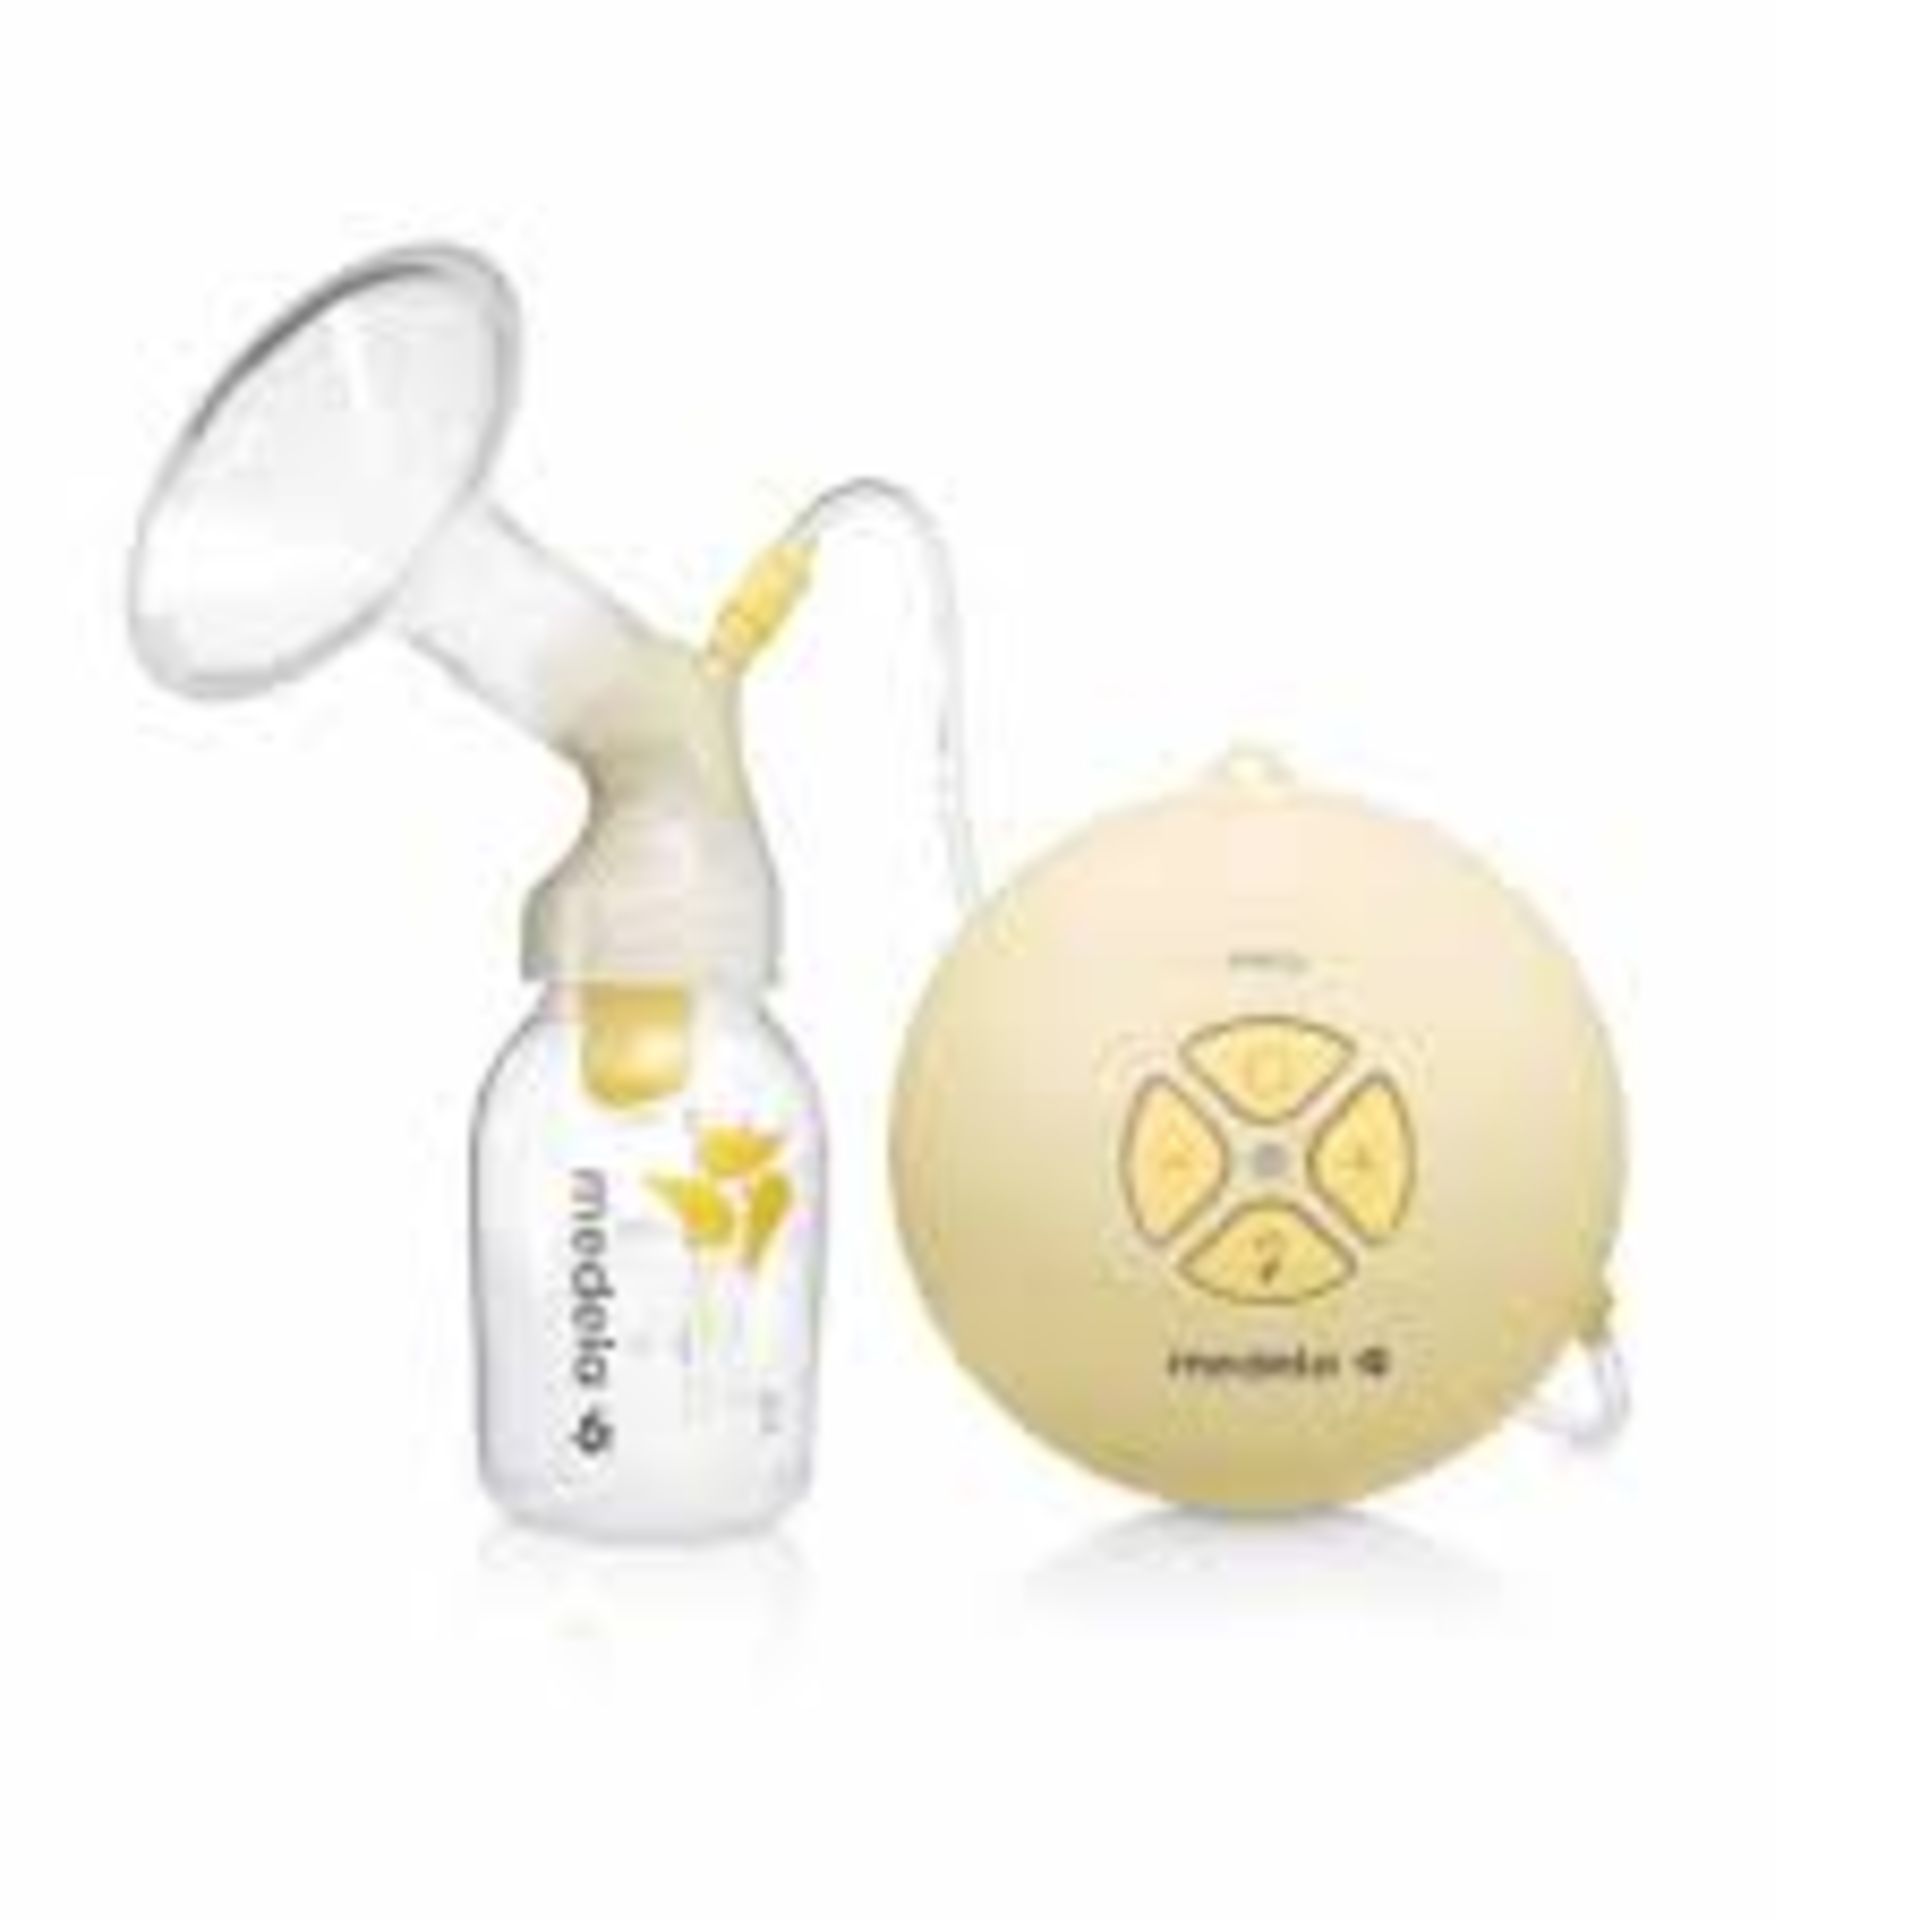 Boxed Medela Swing Single Electric Breast Pump RRP £70 (RET00294568) (Public Viewing and